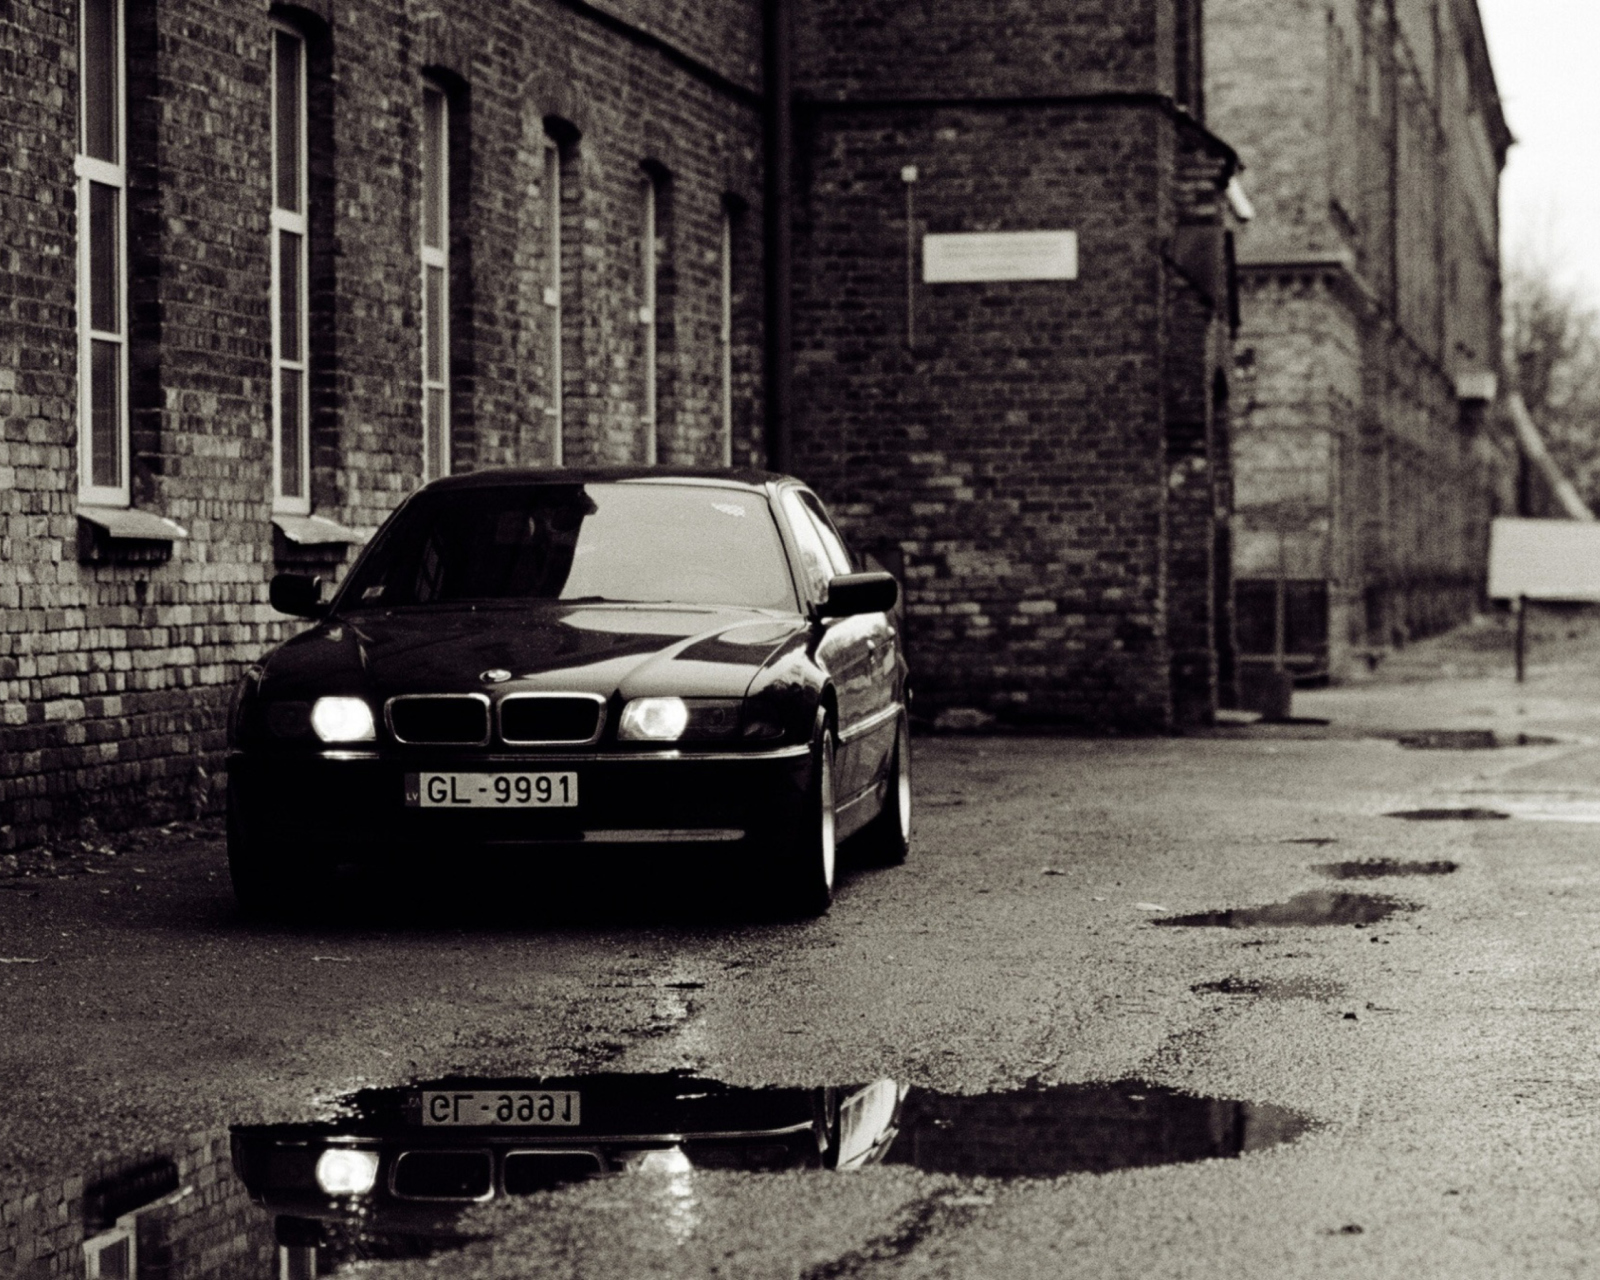 Bmw E38 Old Photography wallpaper 1600x1280